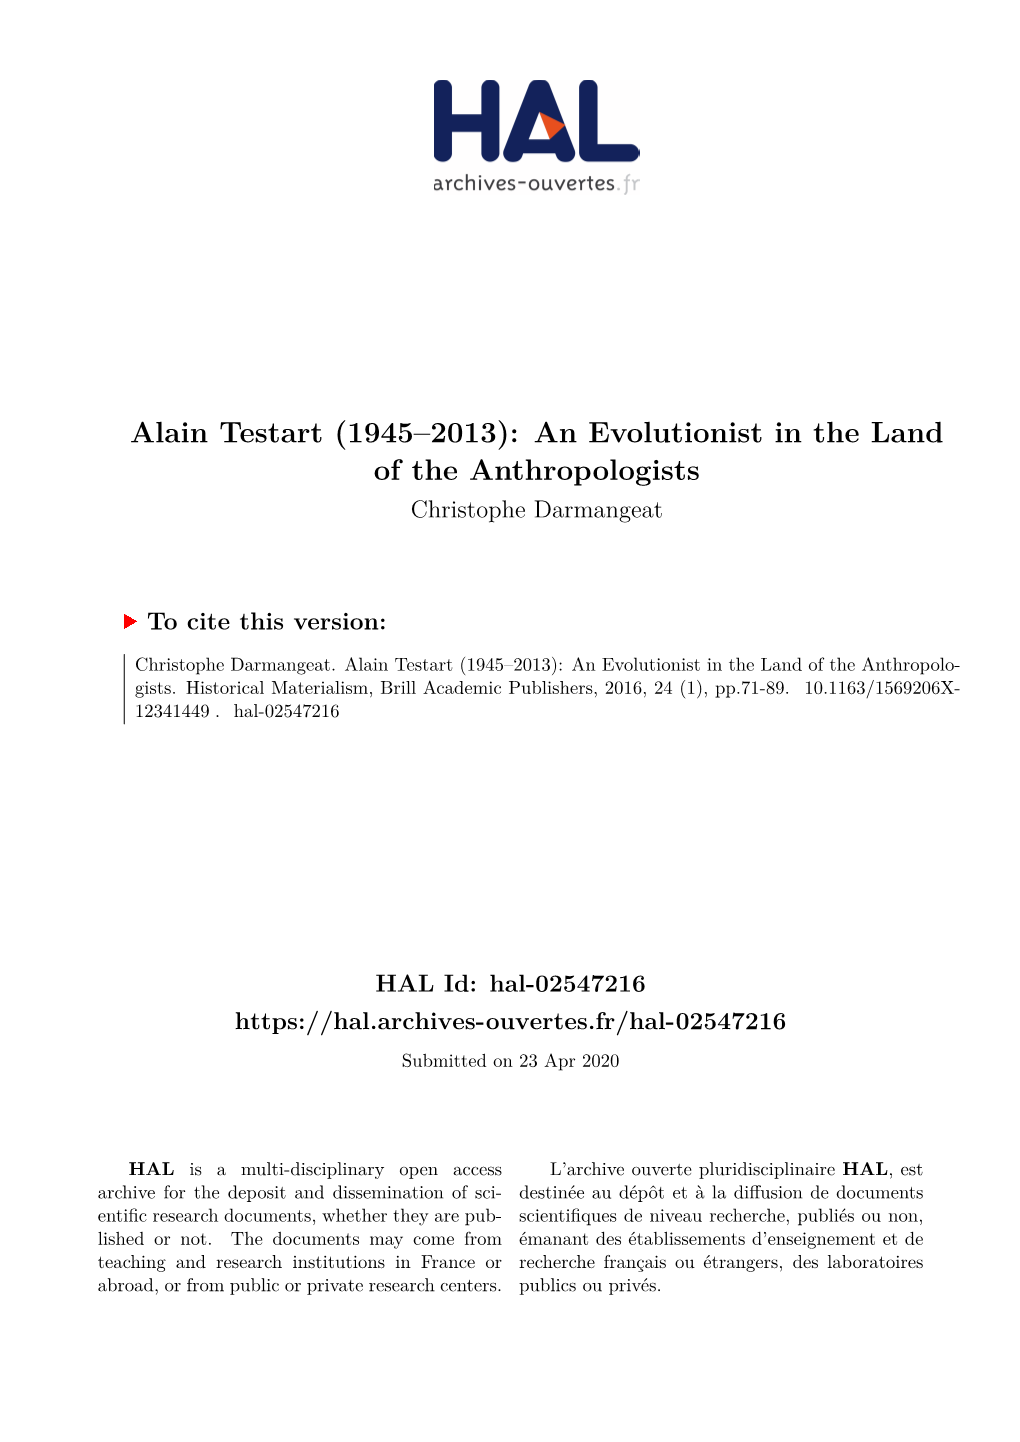 Alain Testart (1945–2013): an Evolutionist in the Land of the Anthropologists Christophe Darmangeat